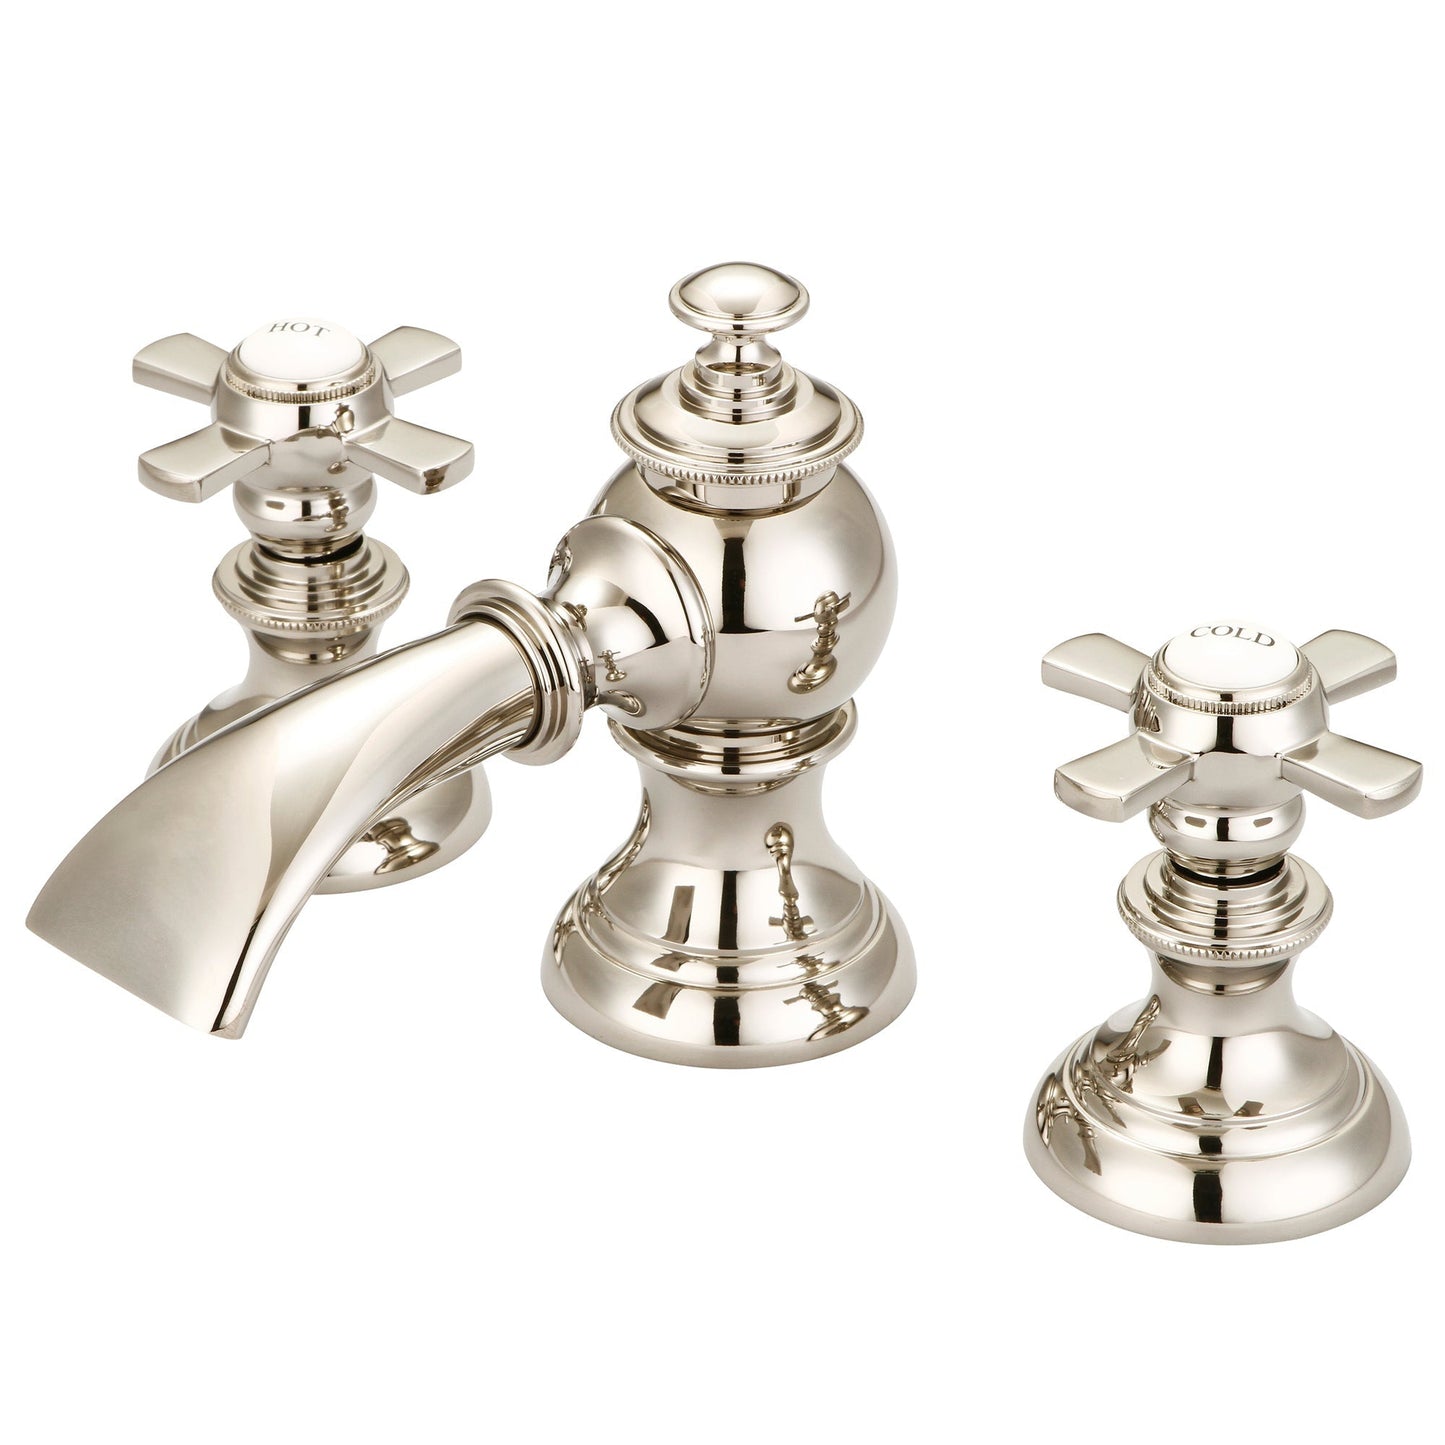 Water Creation Modern Classic Widespread Lavatory F2-0013 8" Ivory Solid Brass Faucet With Pop-Up Drain And Flat Cross Handles